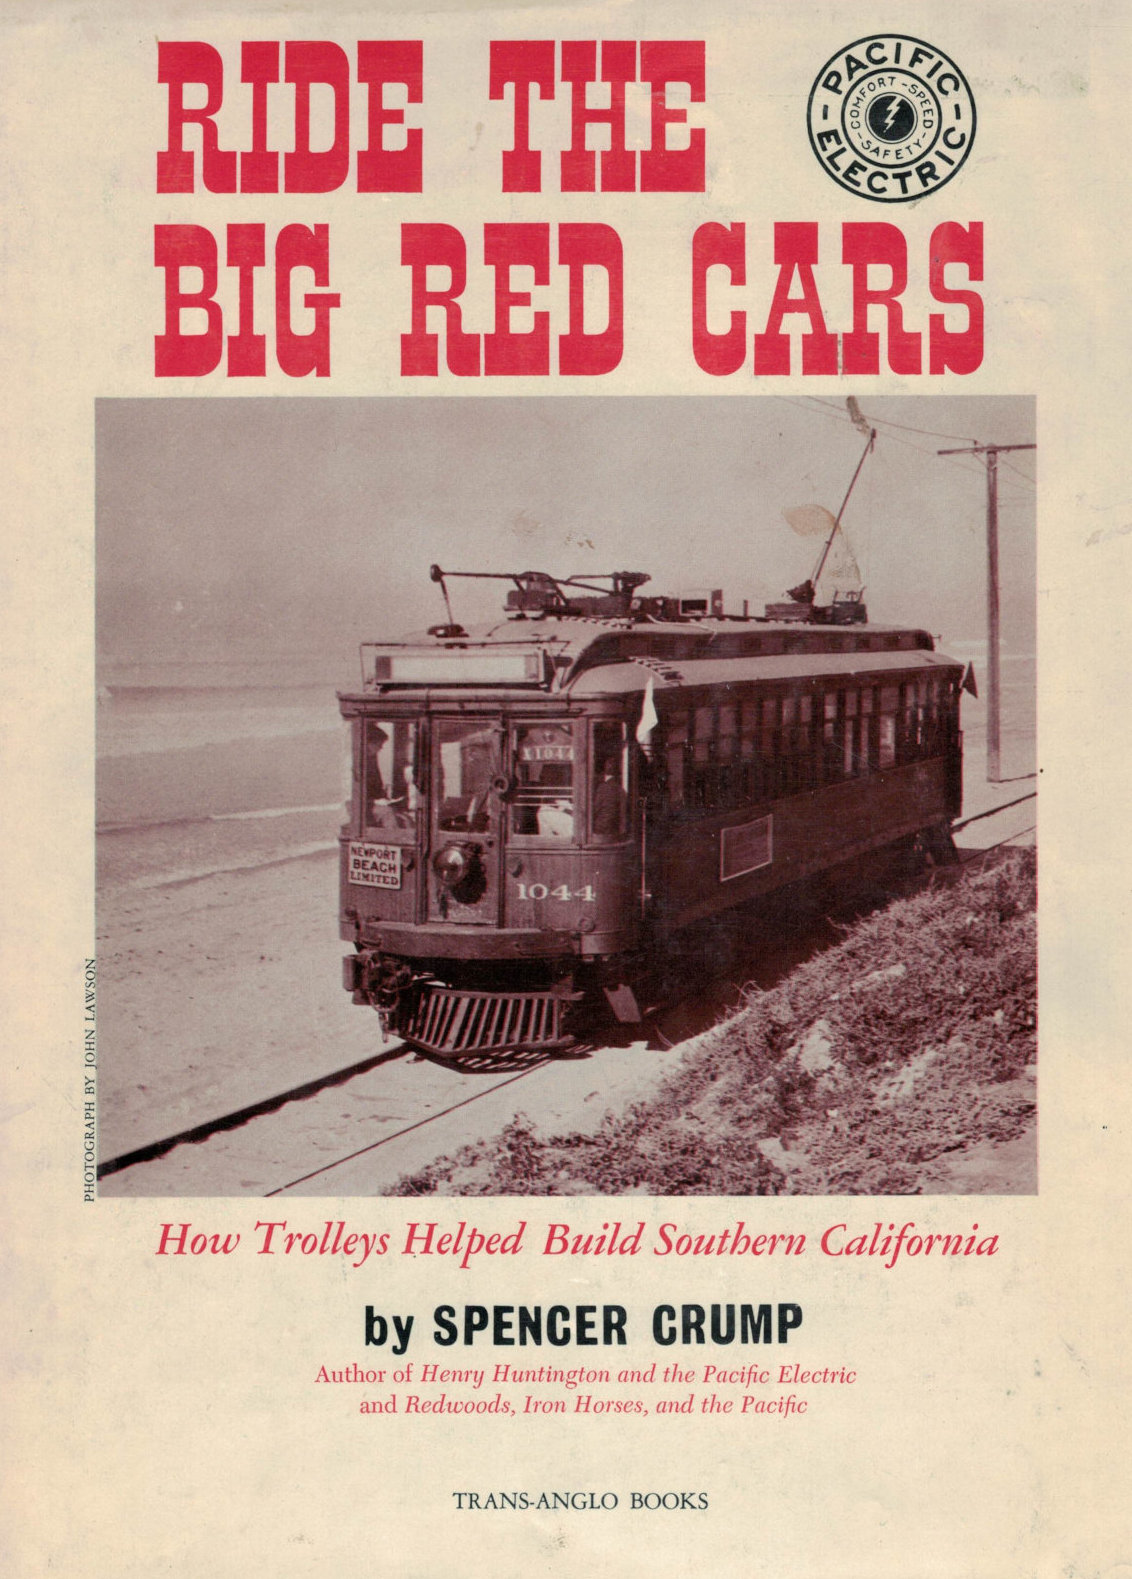 Ride the Big Red Cars (Hardcover, 1970, Trans-Anglo Books)